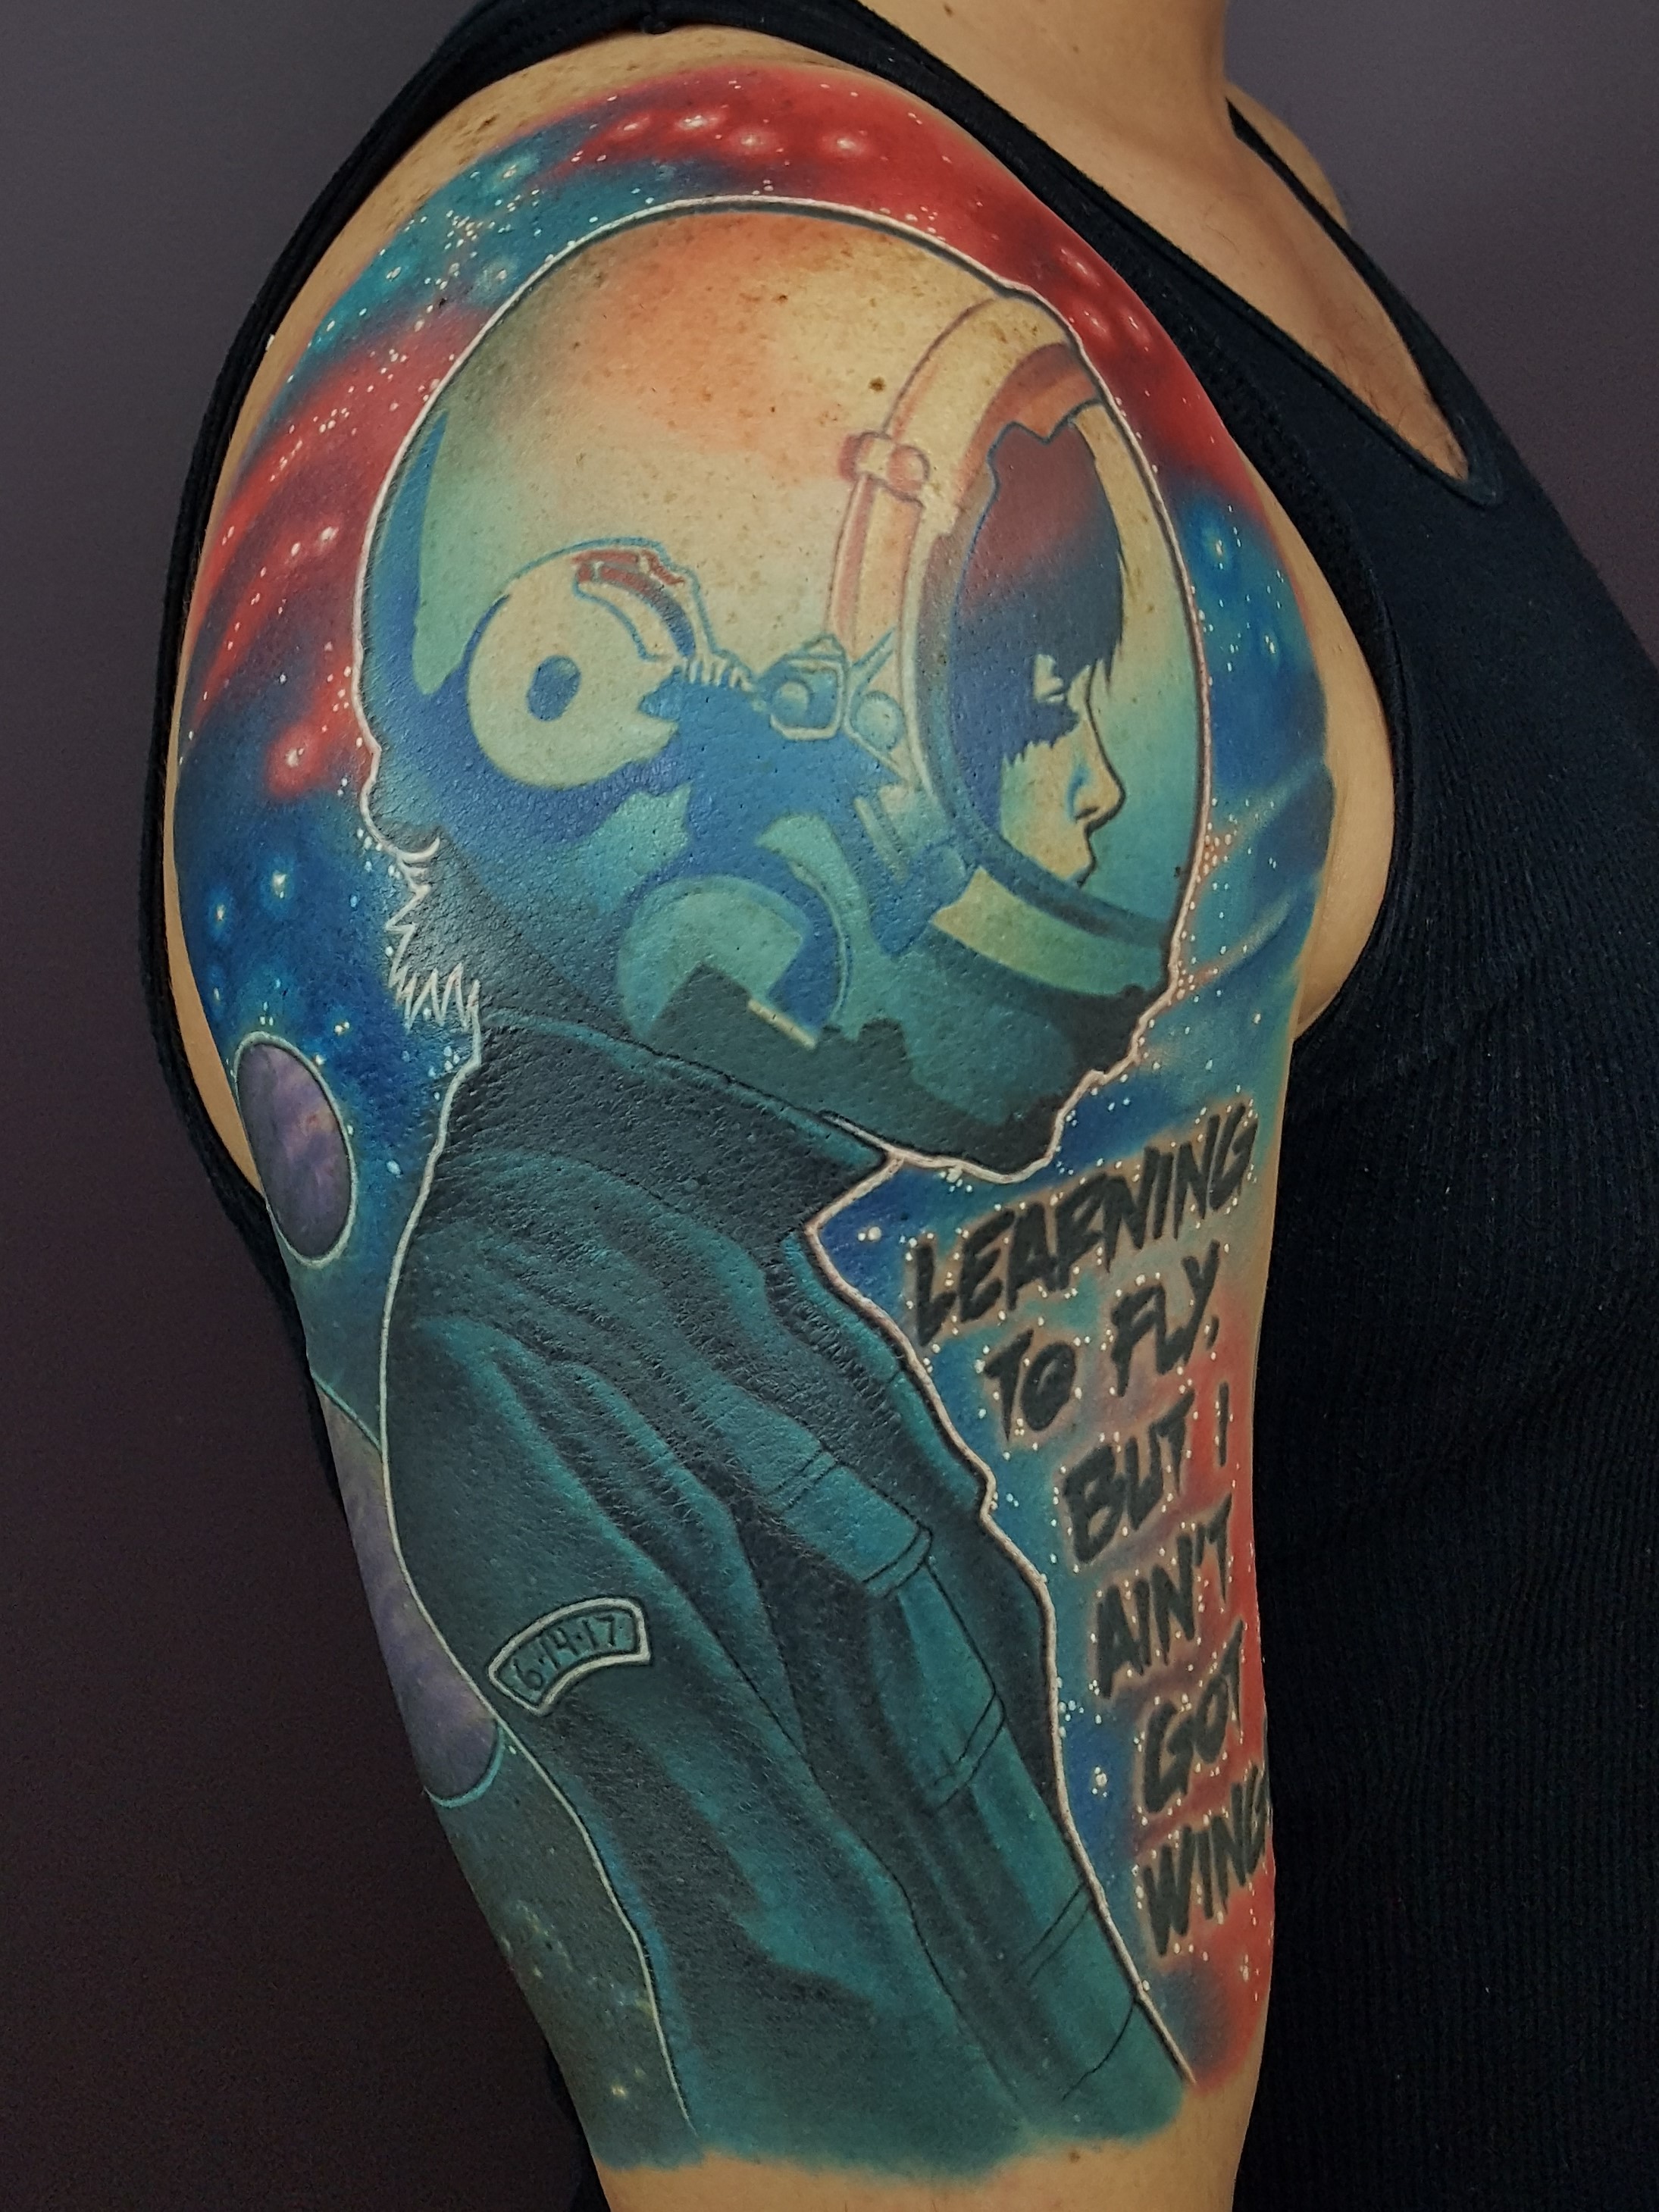 Space Girl Tom Petty Tattoo by Cracker Joe Swider in Connecticut